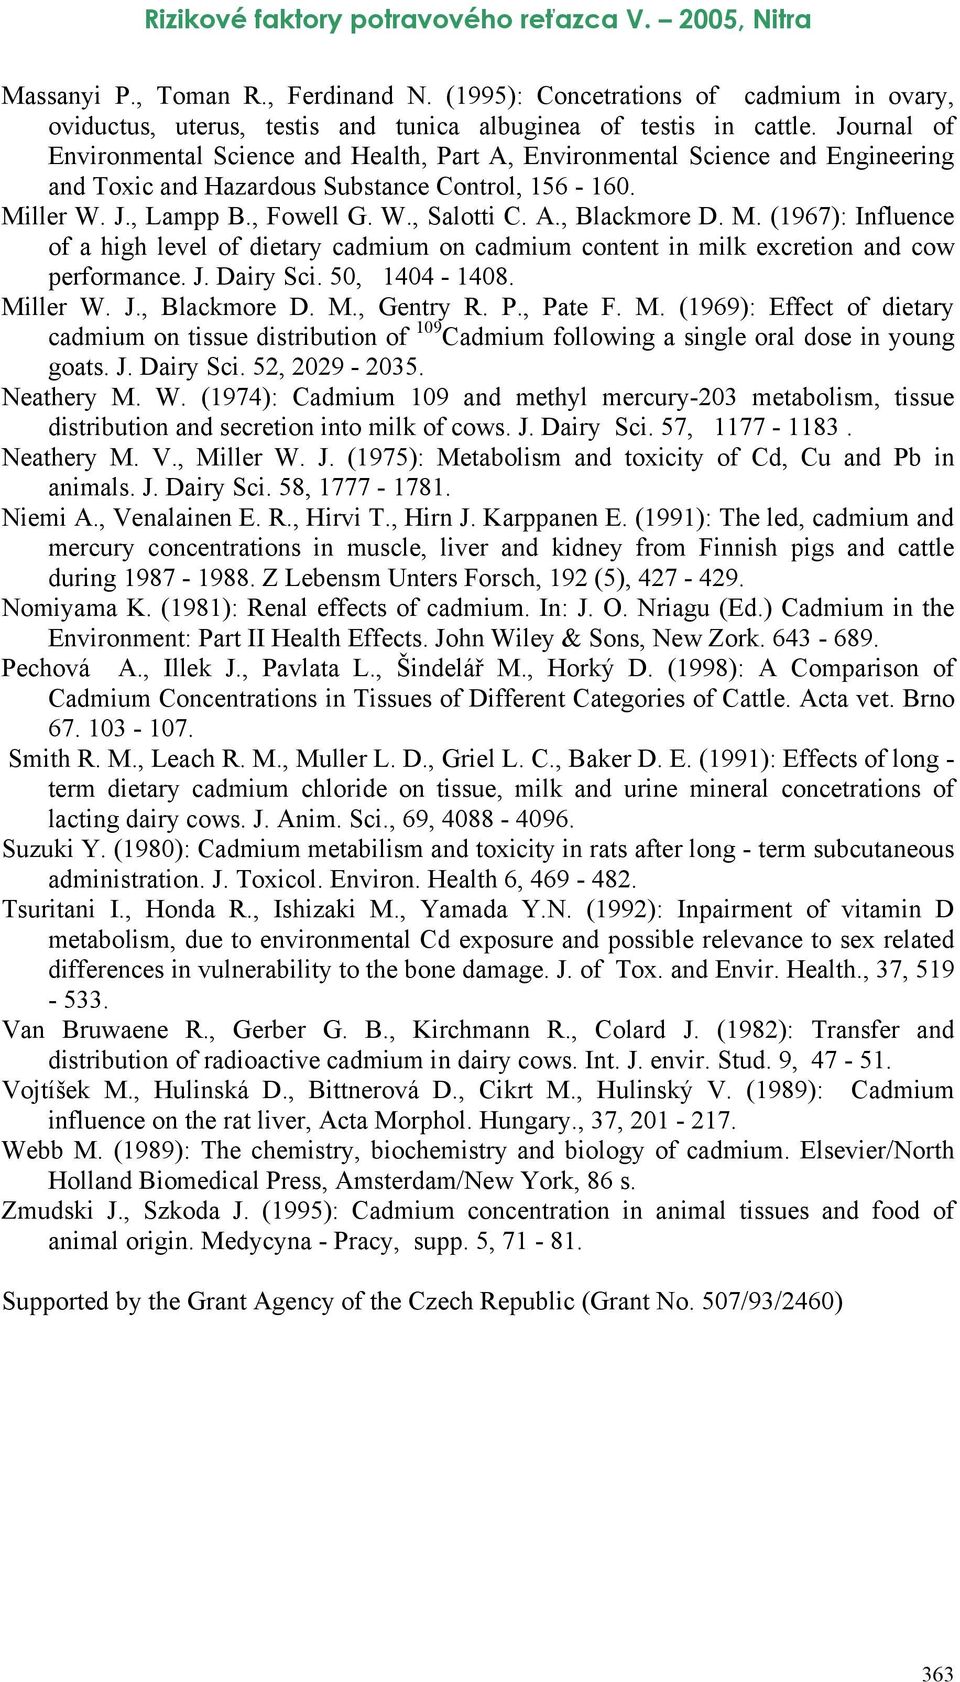 M. (1967): Influence of a high level of dietary cadmium on cadmium content in milk excretion and cow performance. J. Dairy Sci. 50, 1404-1408. Mi